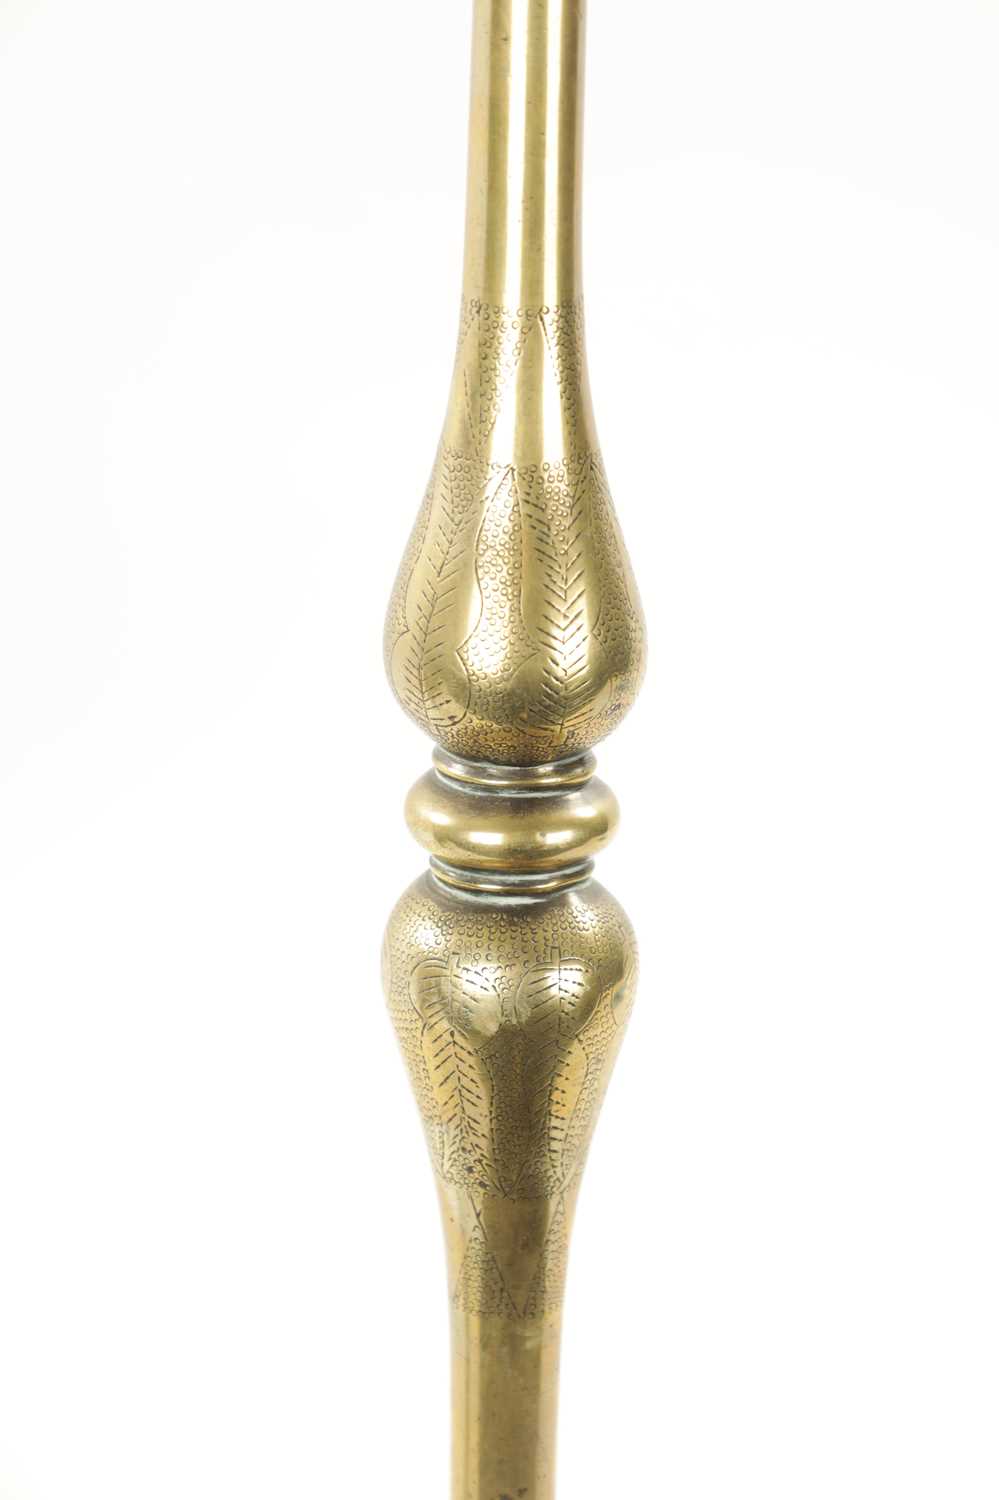 A 19TH CENTURY EASTERN BRASS CANDLESTICK - Image 5 of 10